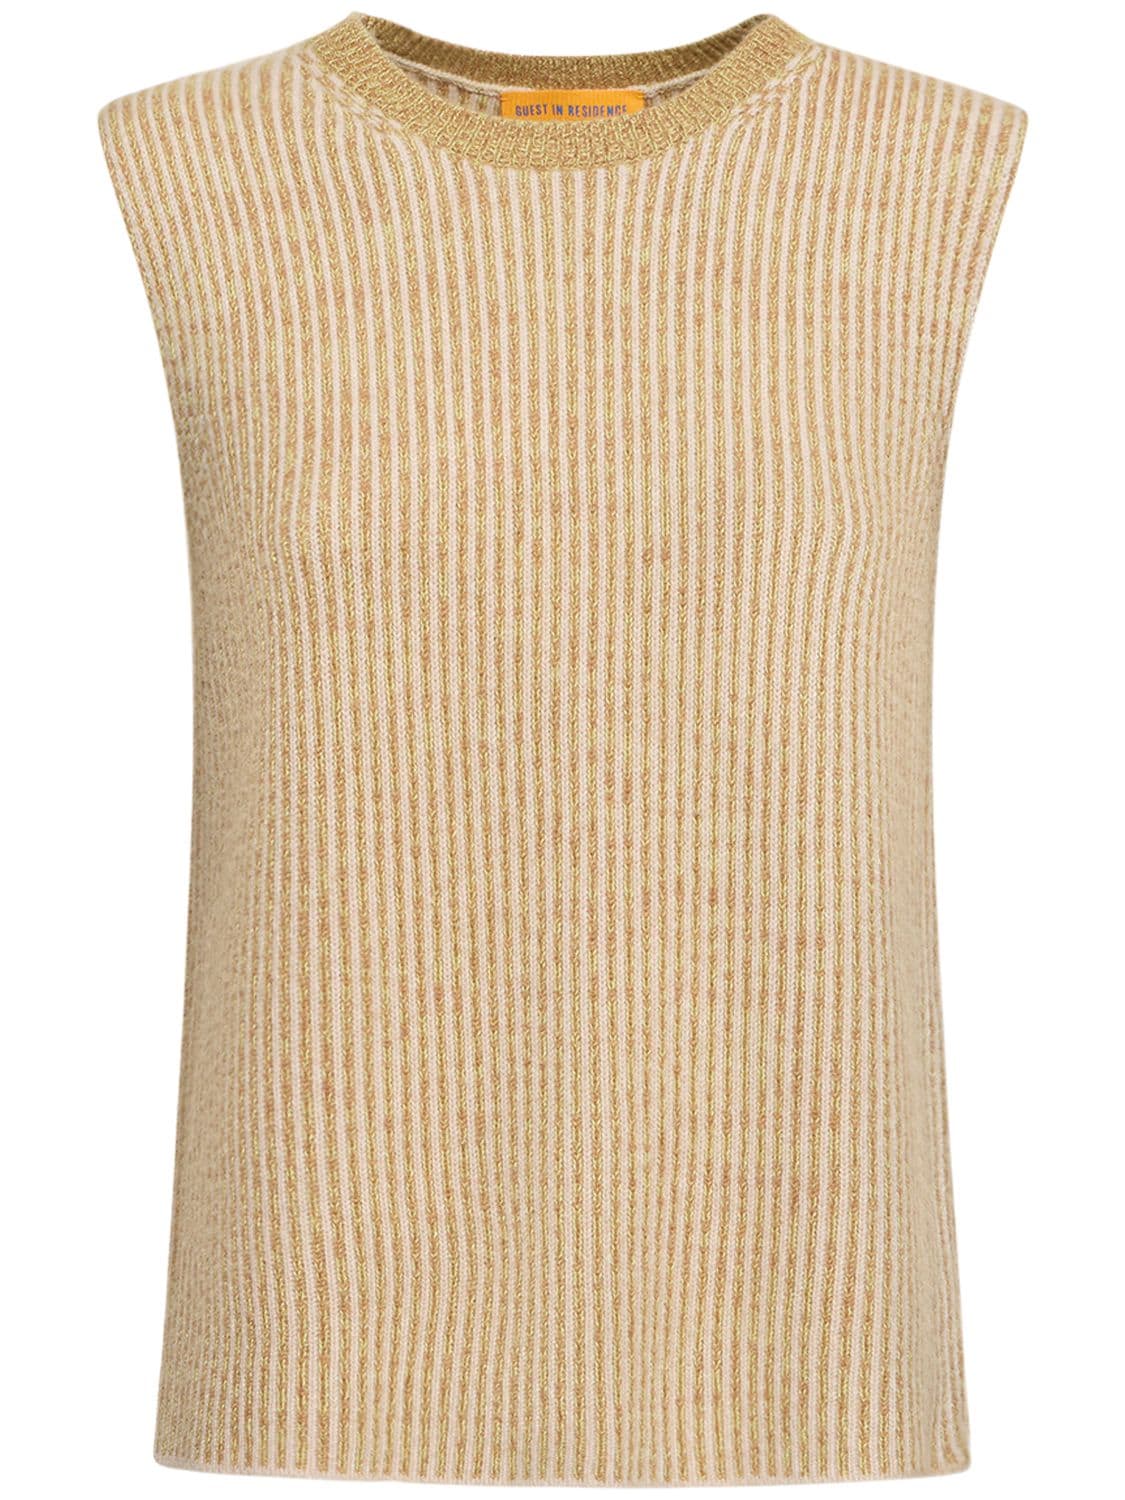 GUEST IN RESIDENCE TRI RIB CASHMERE VEST